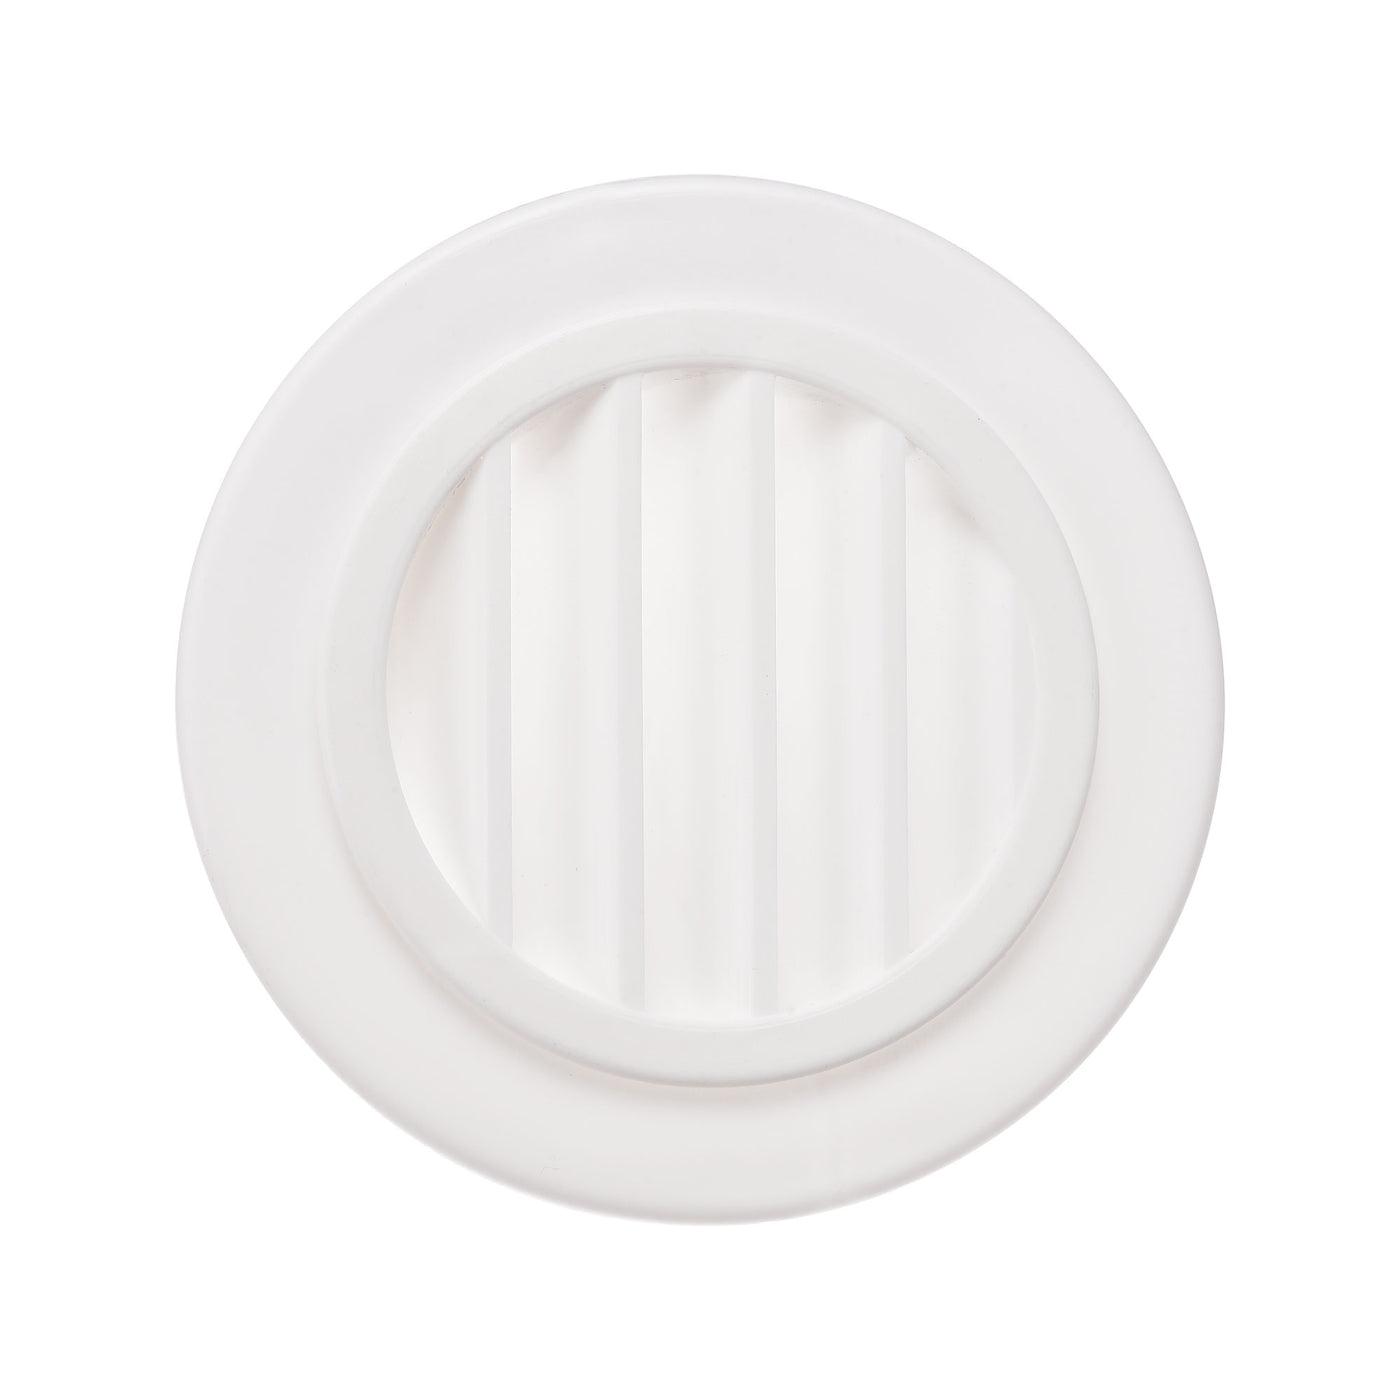 uxcell Uxcell Round Vent Cover, PP Plastic Detachable Air Vent Exhaust Louver for 2.8" - 3.2" Diameter Hole